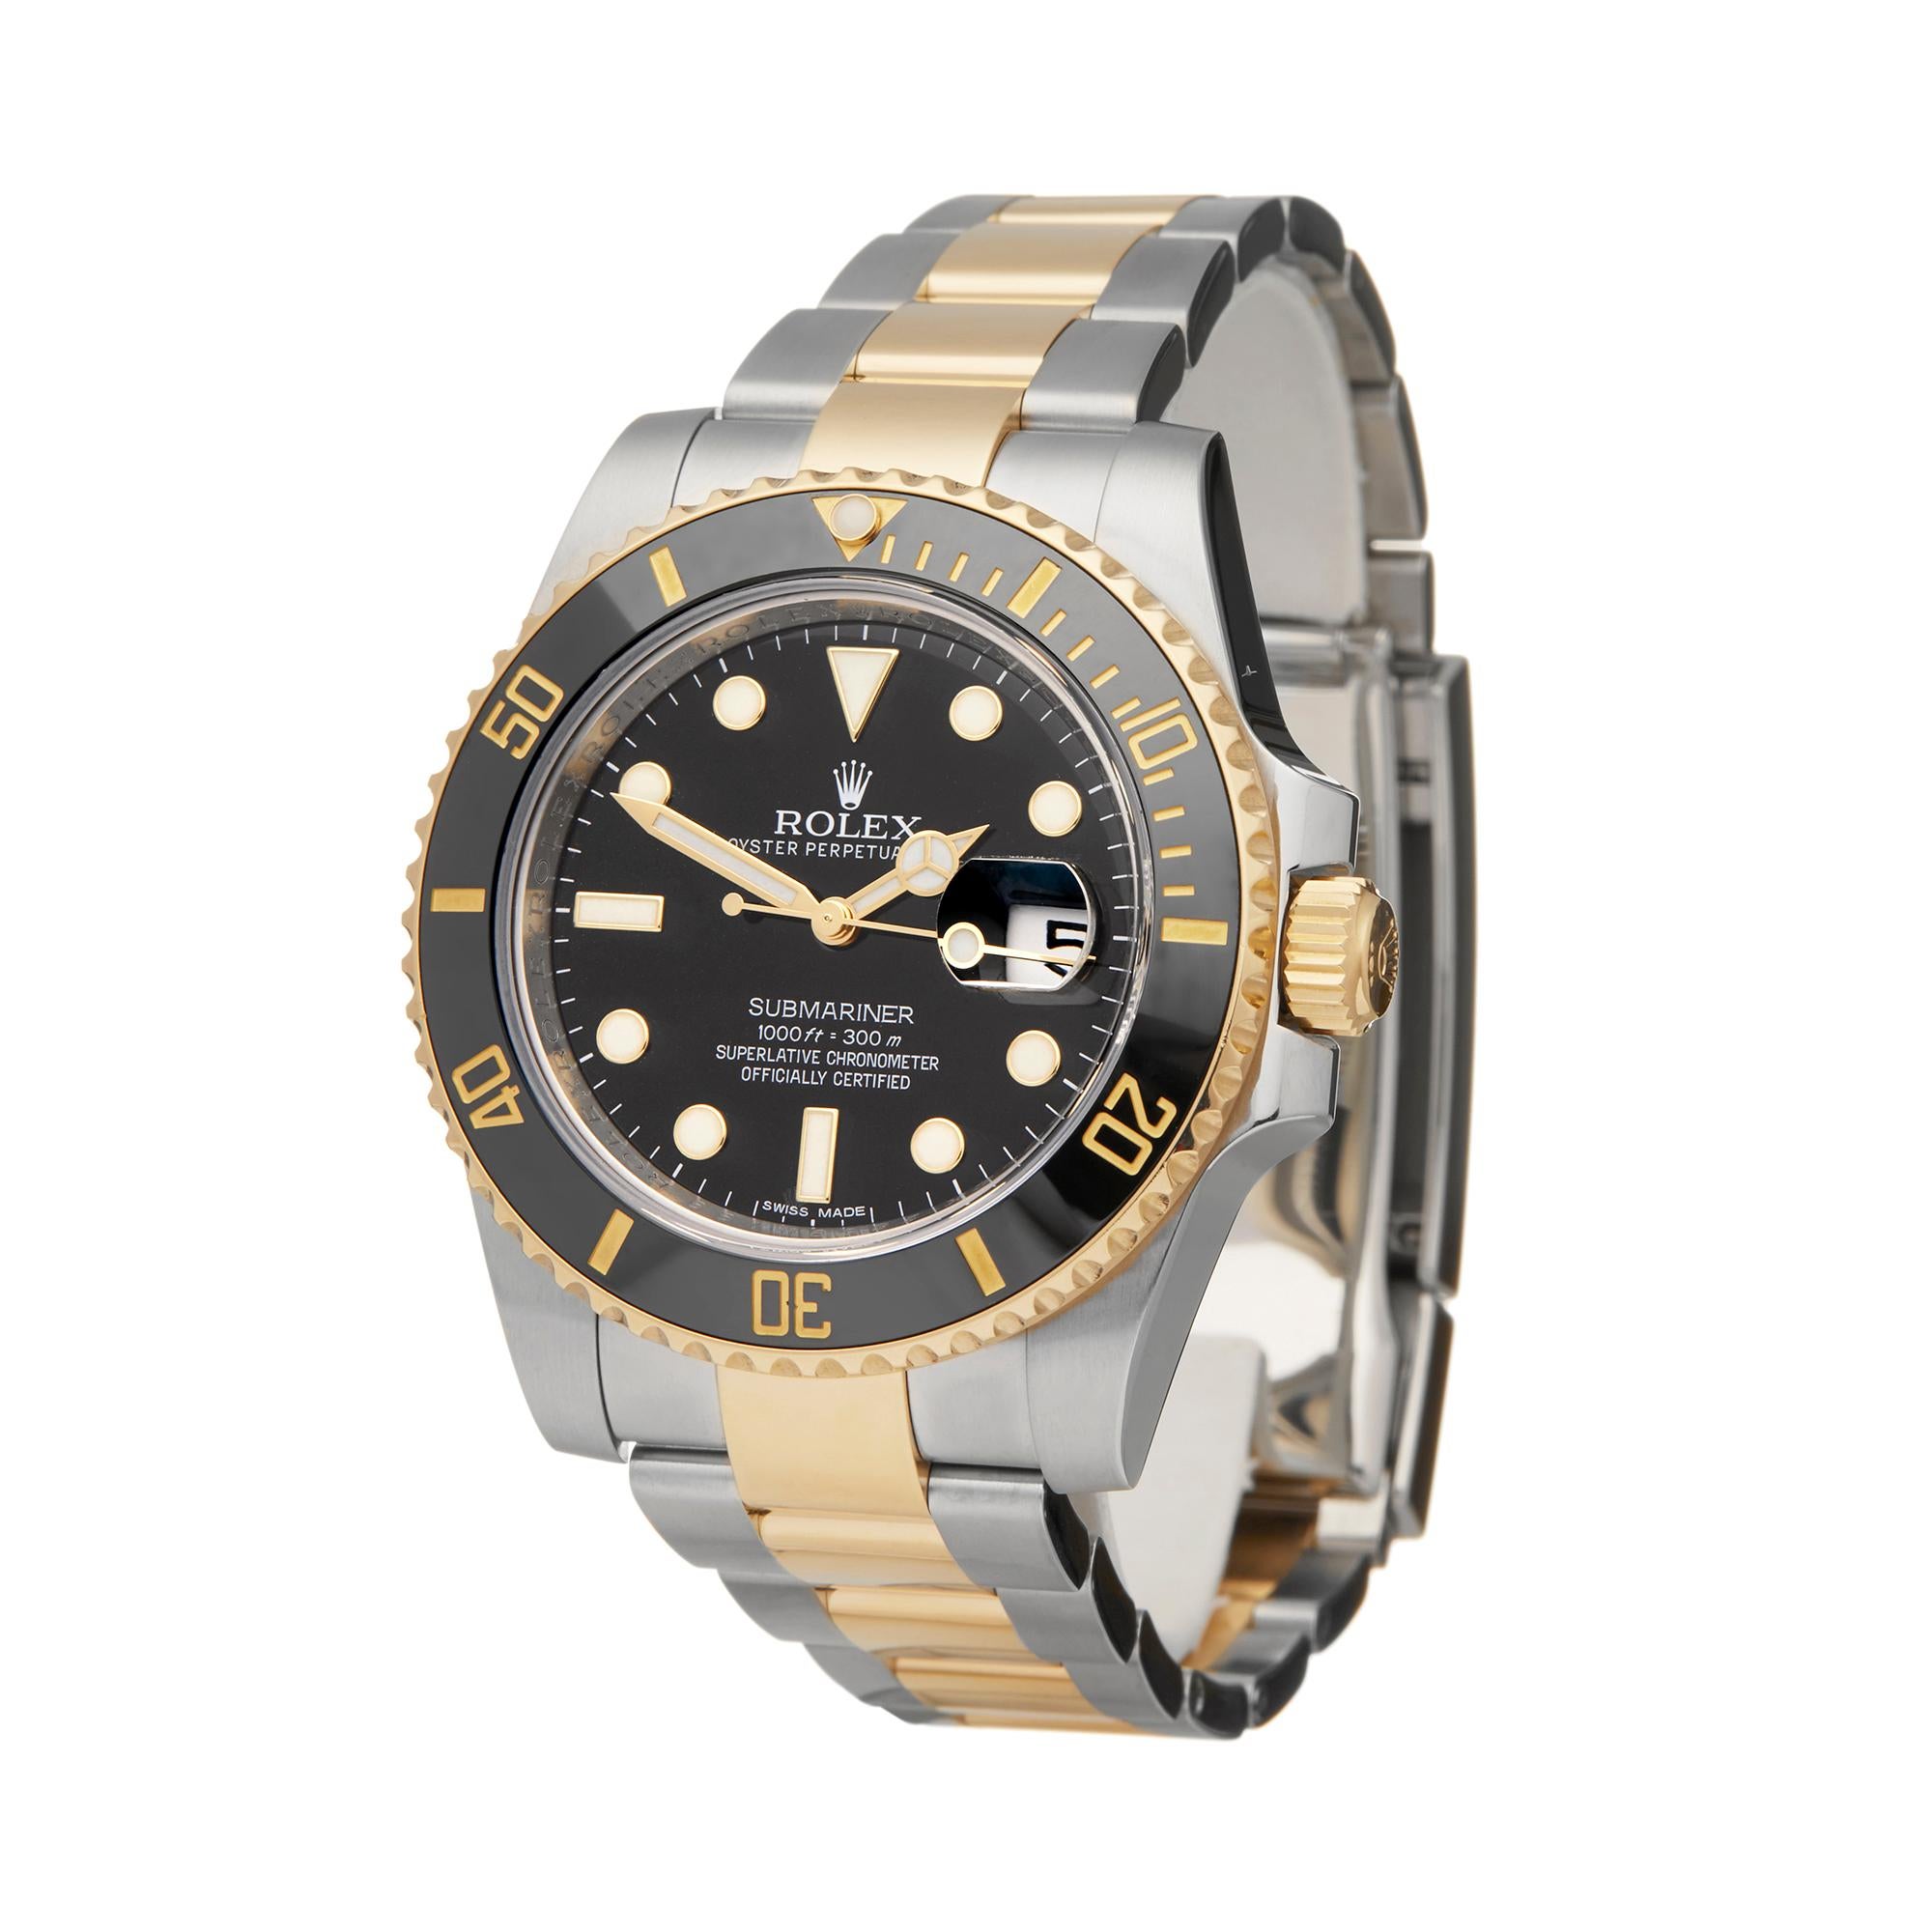 Reference: W5938
Manufacturer: Rolex
Model: Submariner
Model Reference: 116613LN
Age: 9th July 2016
Gender: Men's
Box and Papers: Box, Manuals and Guarantee
Dial: Black
Glass: Sapphire Crystal
Movement: Automatic
Water Resistance: To Manufacturers